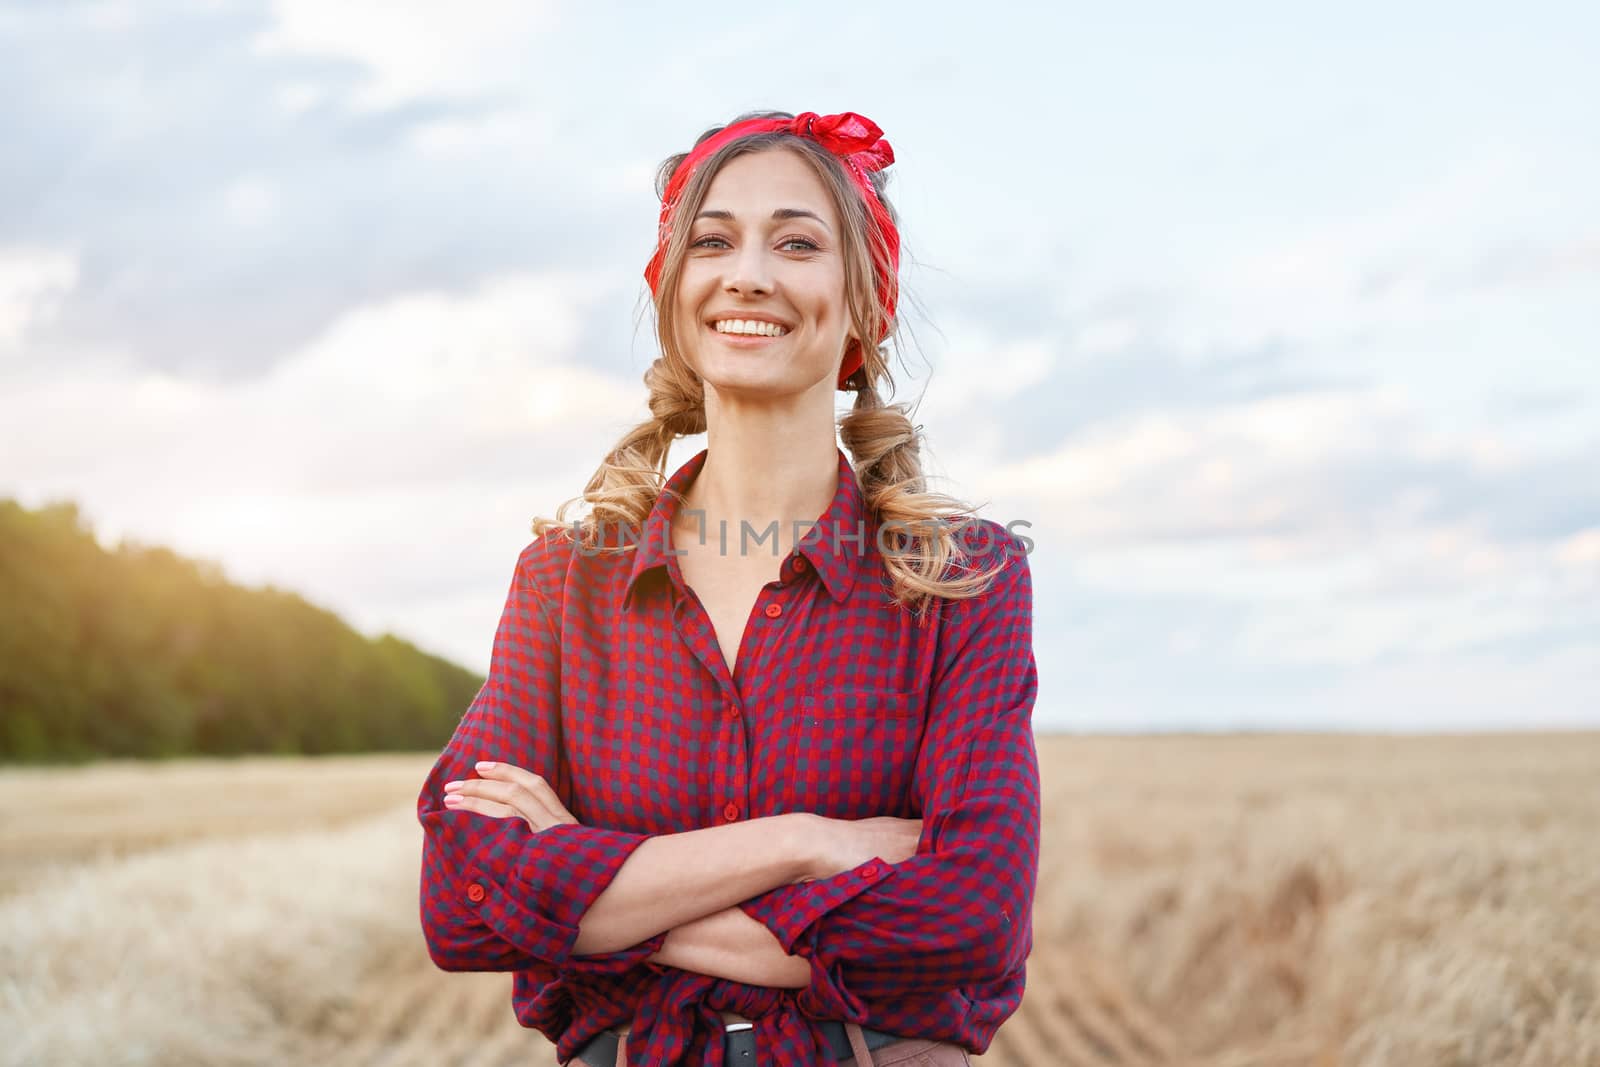 Woman farmer standing farmland smiling Female agronomist specialist farming agribusiness Happy positive caucasian worker agricultural field dressed red checkered shirt and bandana arms crossed